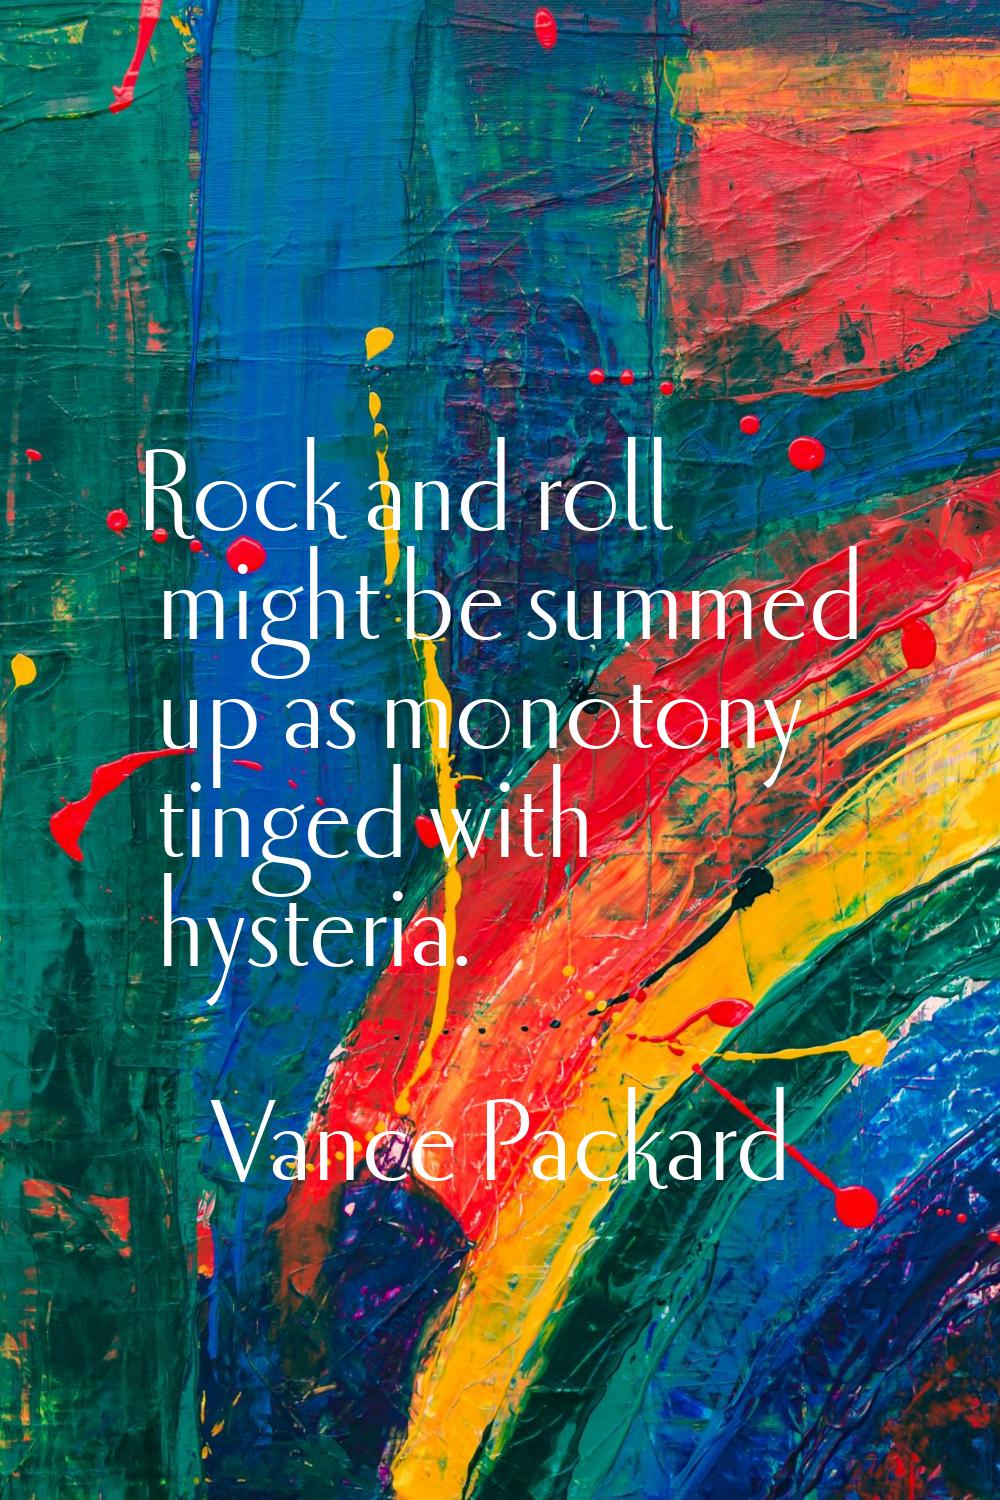 Rock and roll might be summed up as monotony tinged with hysteria.